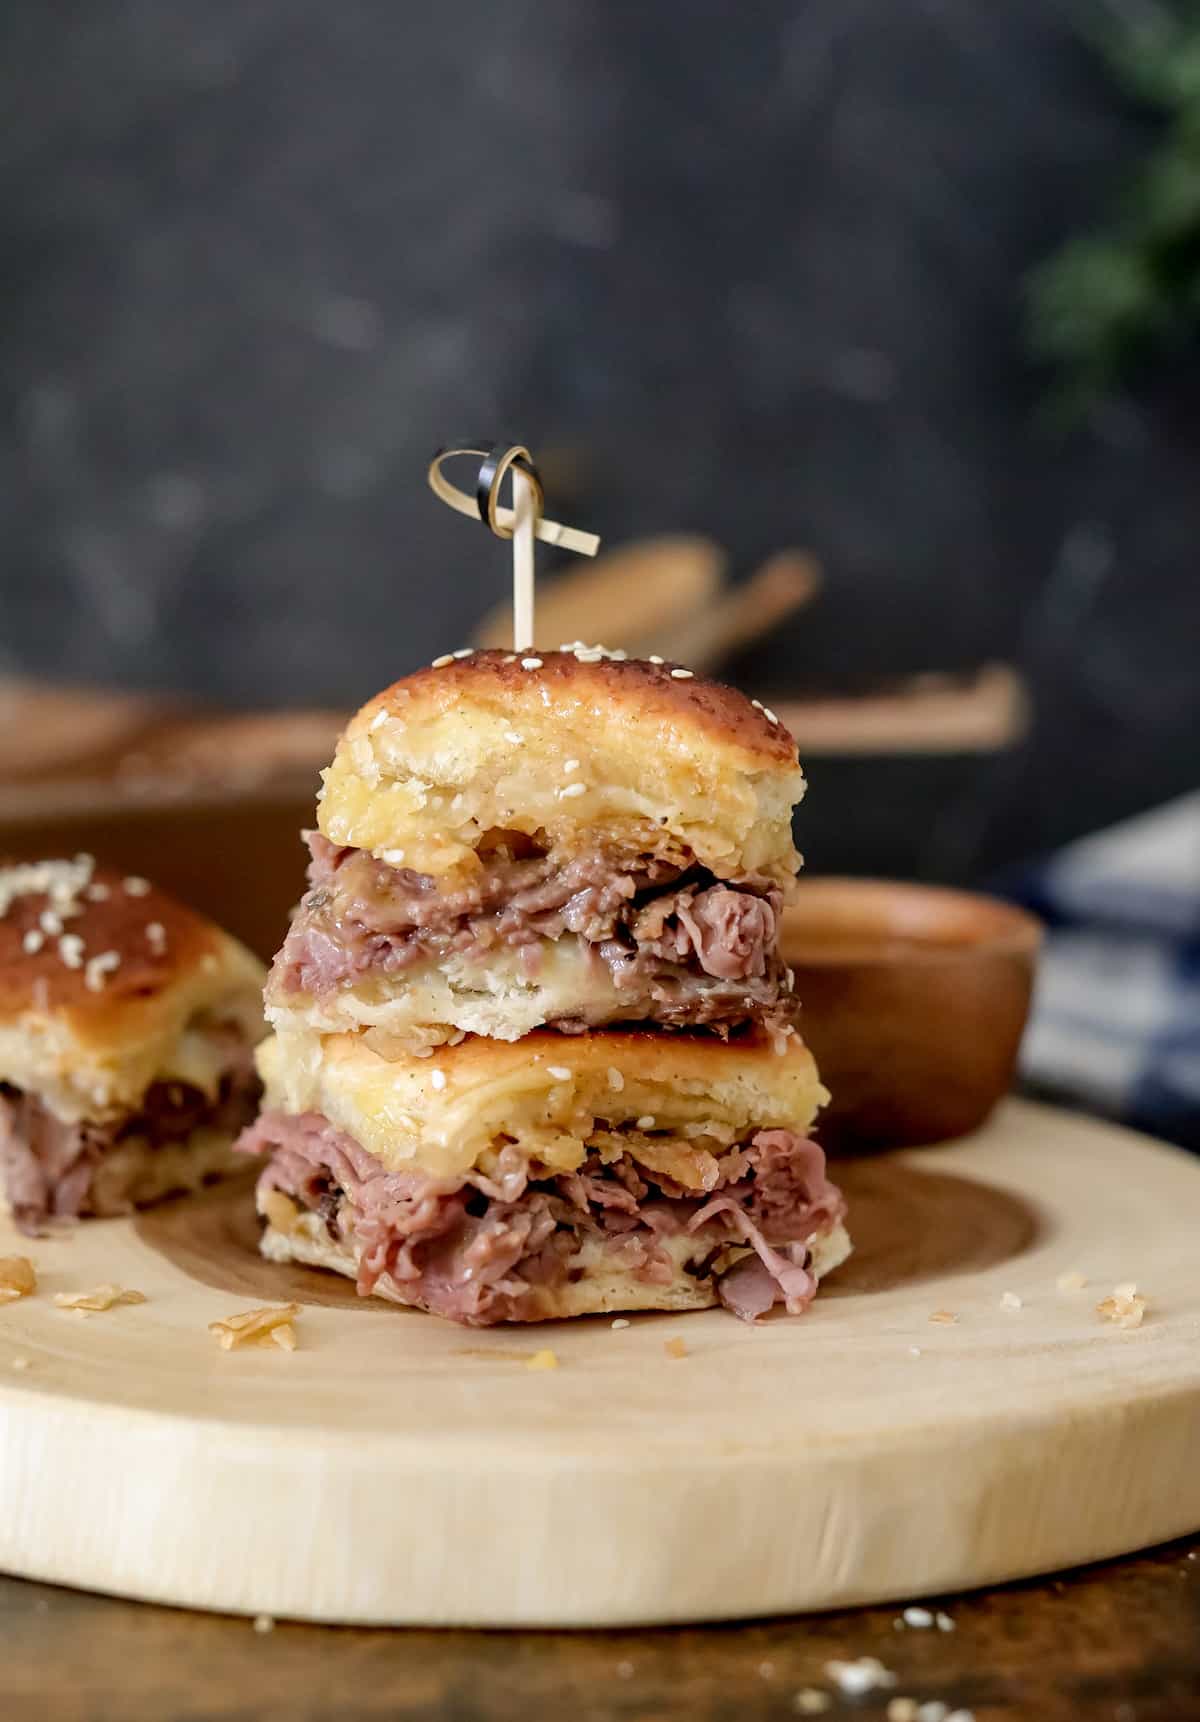 Beef on small buns with cheese and au jus.